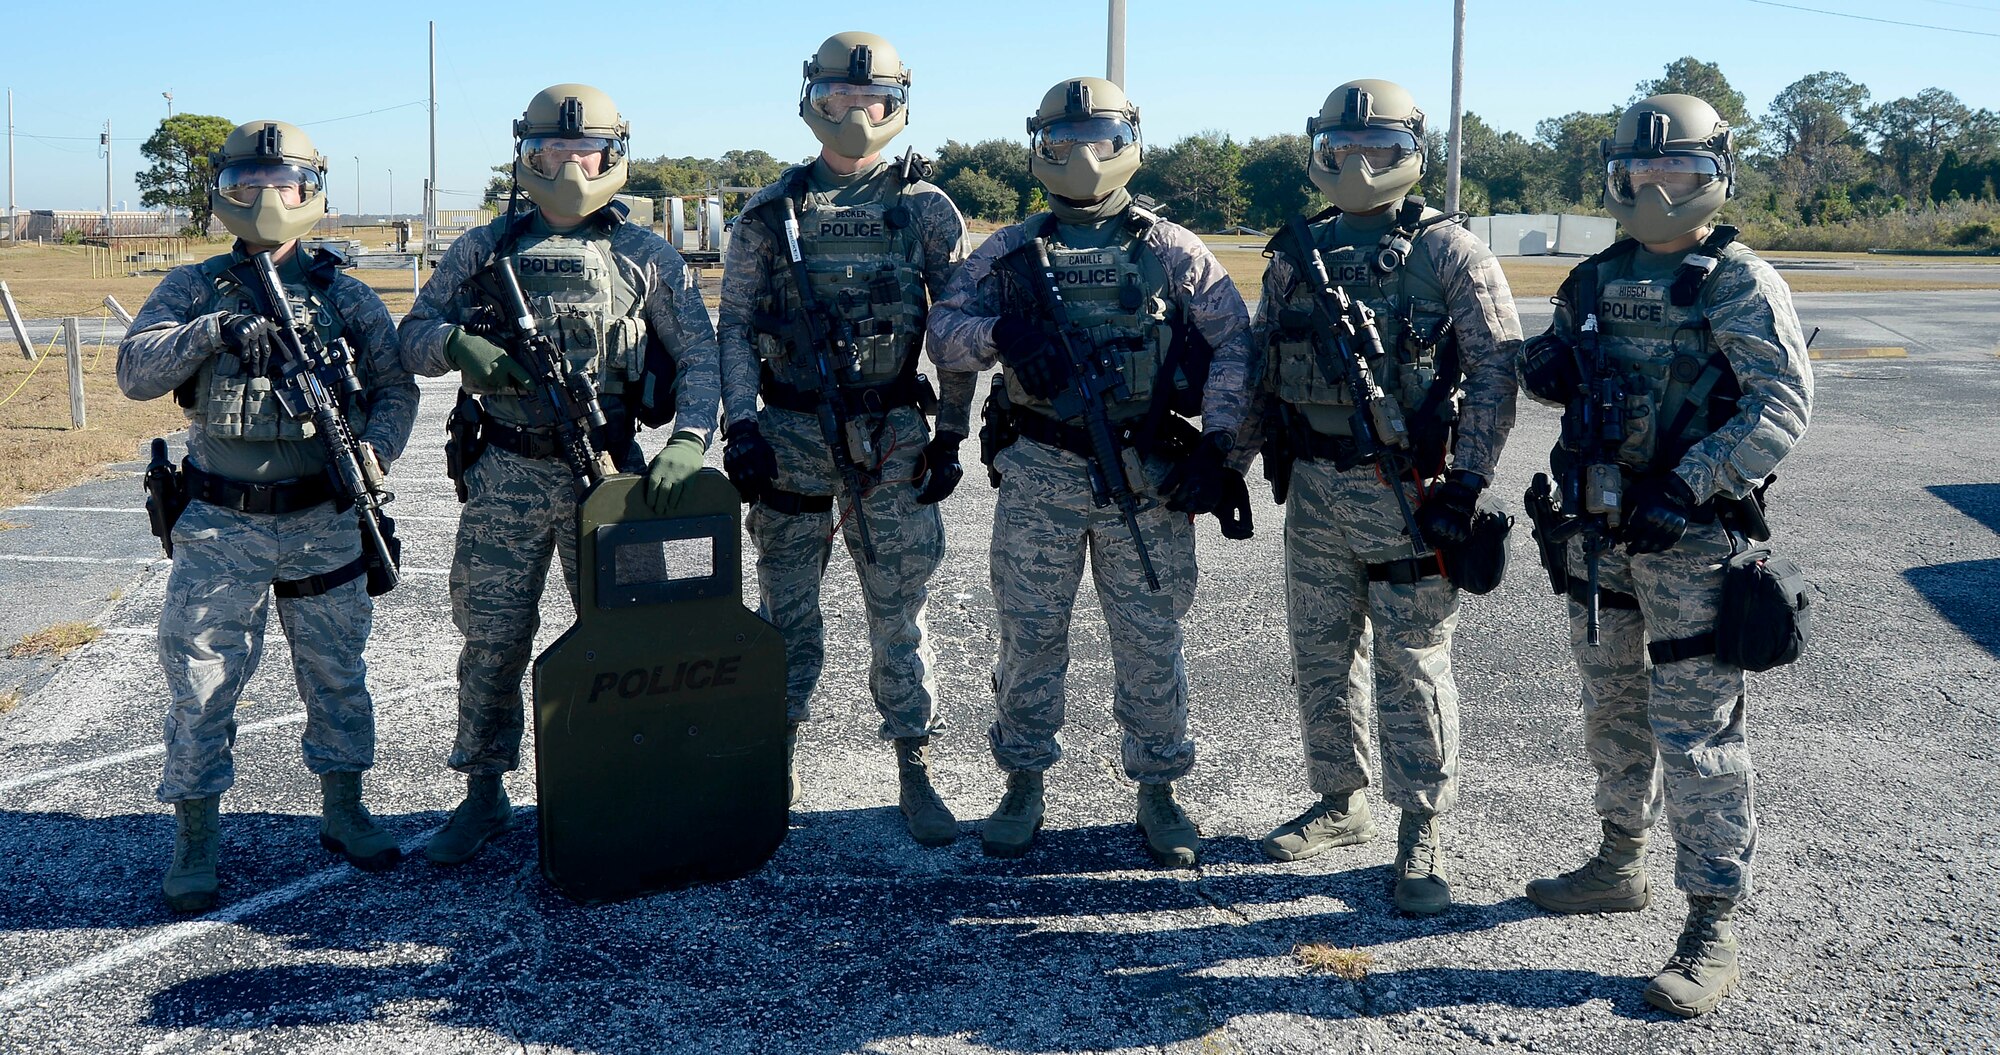 Emergency services team (EST) members assigned to the 6th Security Forces Squadron (SFS) pause for a group photo during an immersion, Nov. 21, 2016 at MacDill Air Force Base, Fla. During the immersion, the 6th Security Forces Squadron demonstrated the capabilities of their SWAT and emergency services teams. (U.S. Air Force photo by Senior Airman Jenay Randolph)